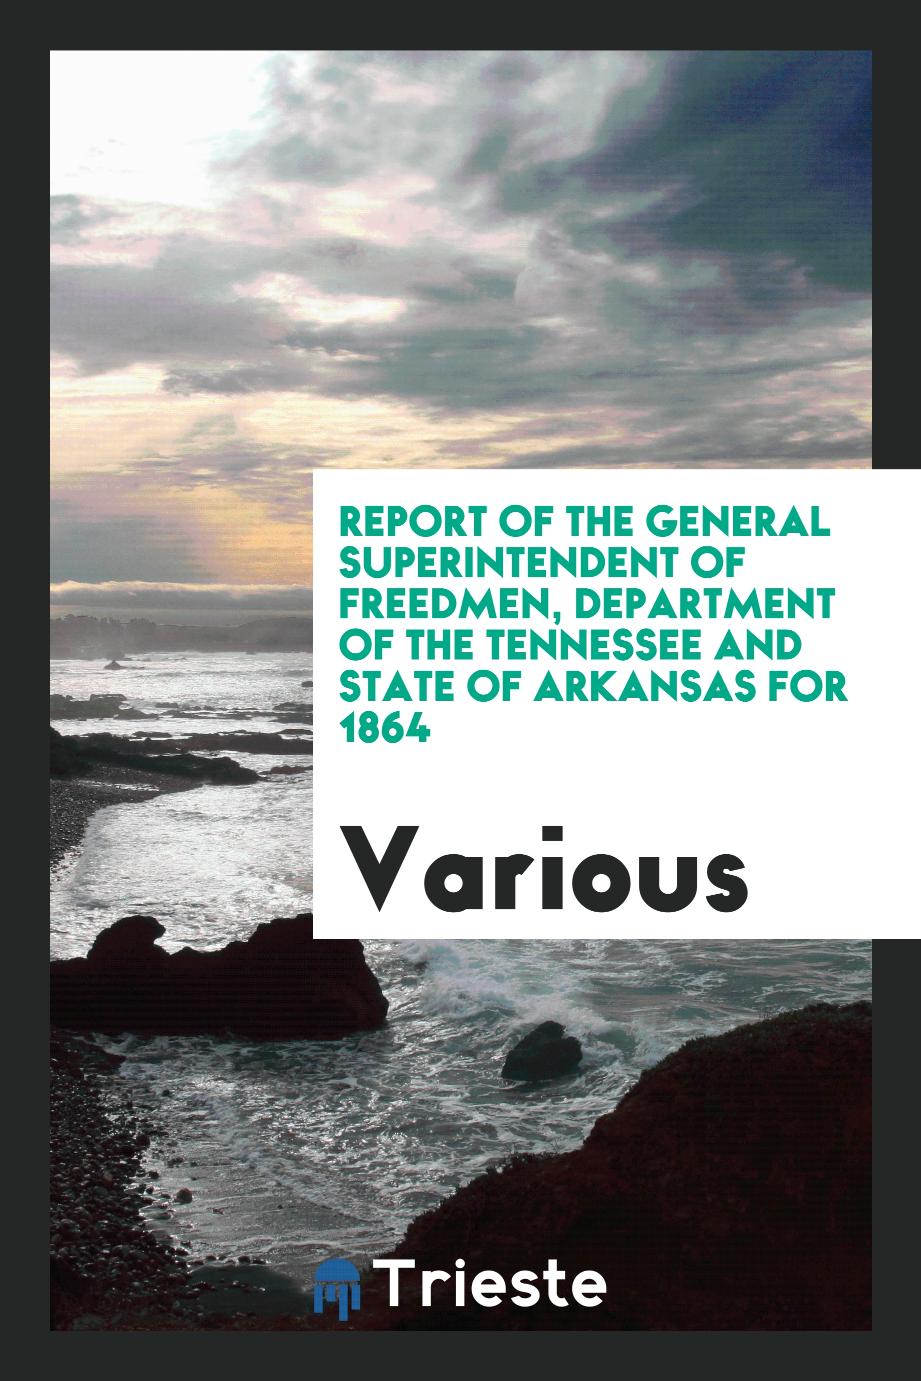 Report of the General Superintendent of Freedmen, Department of the Tennessee and State of Arkansas for 1864